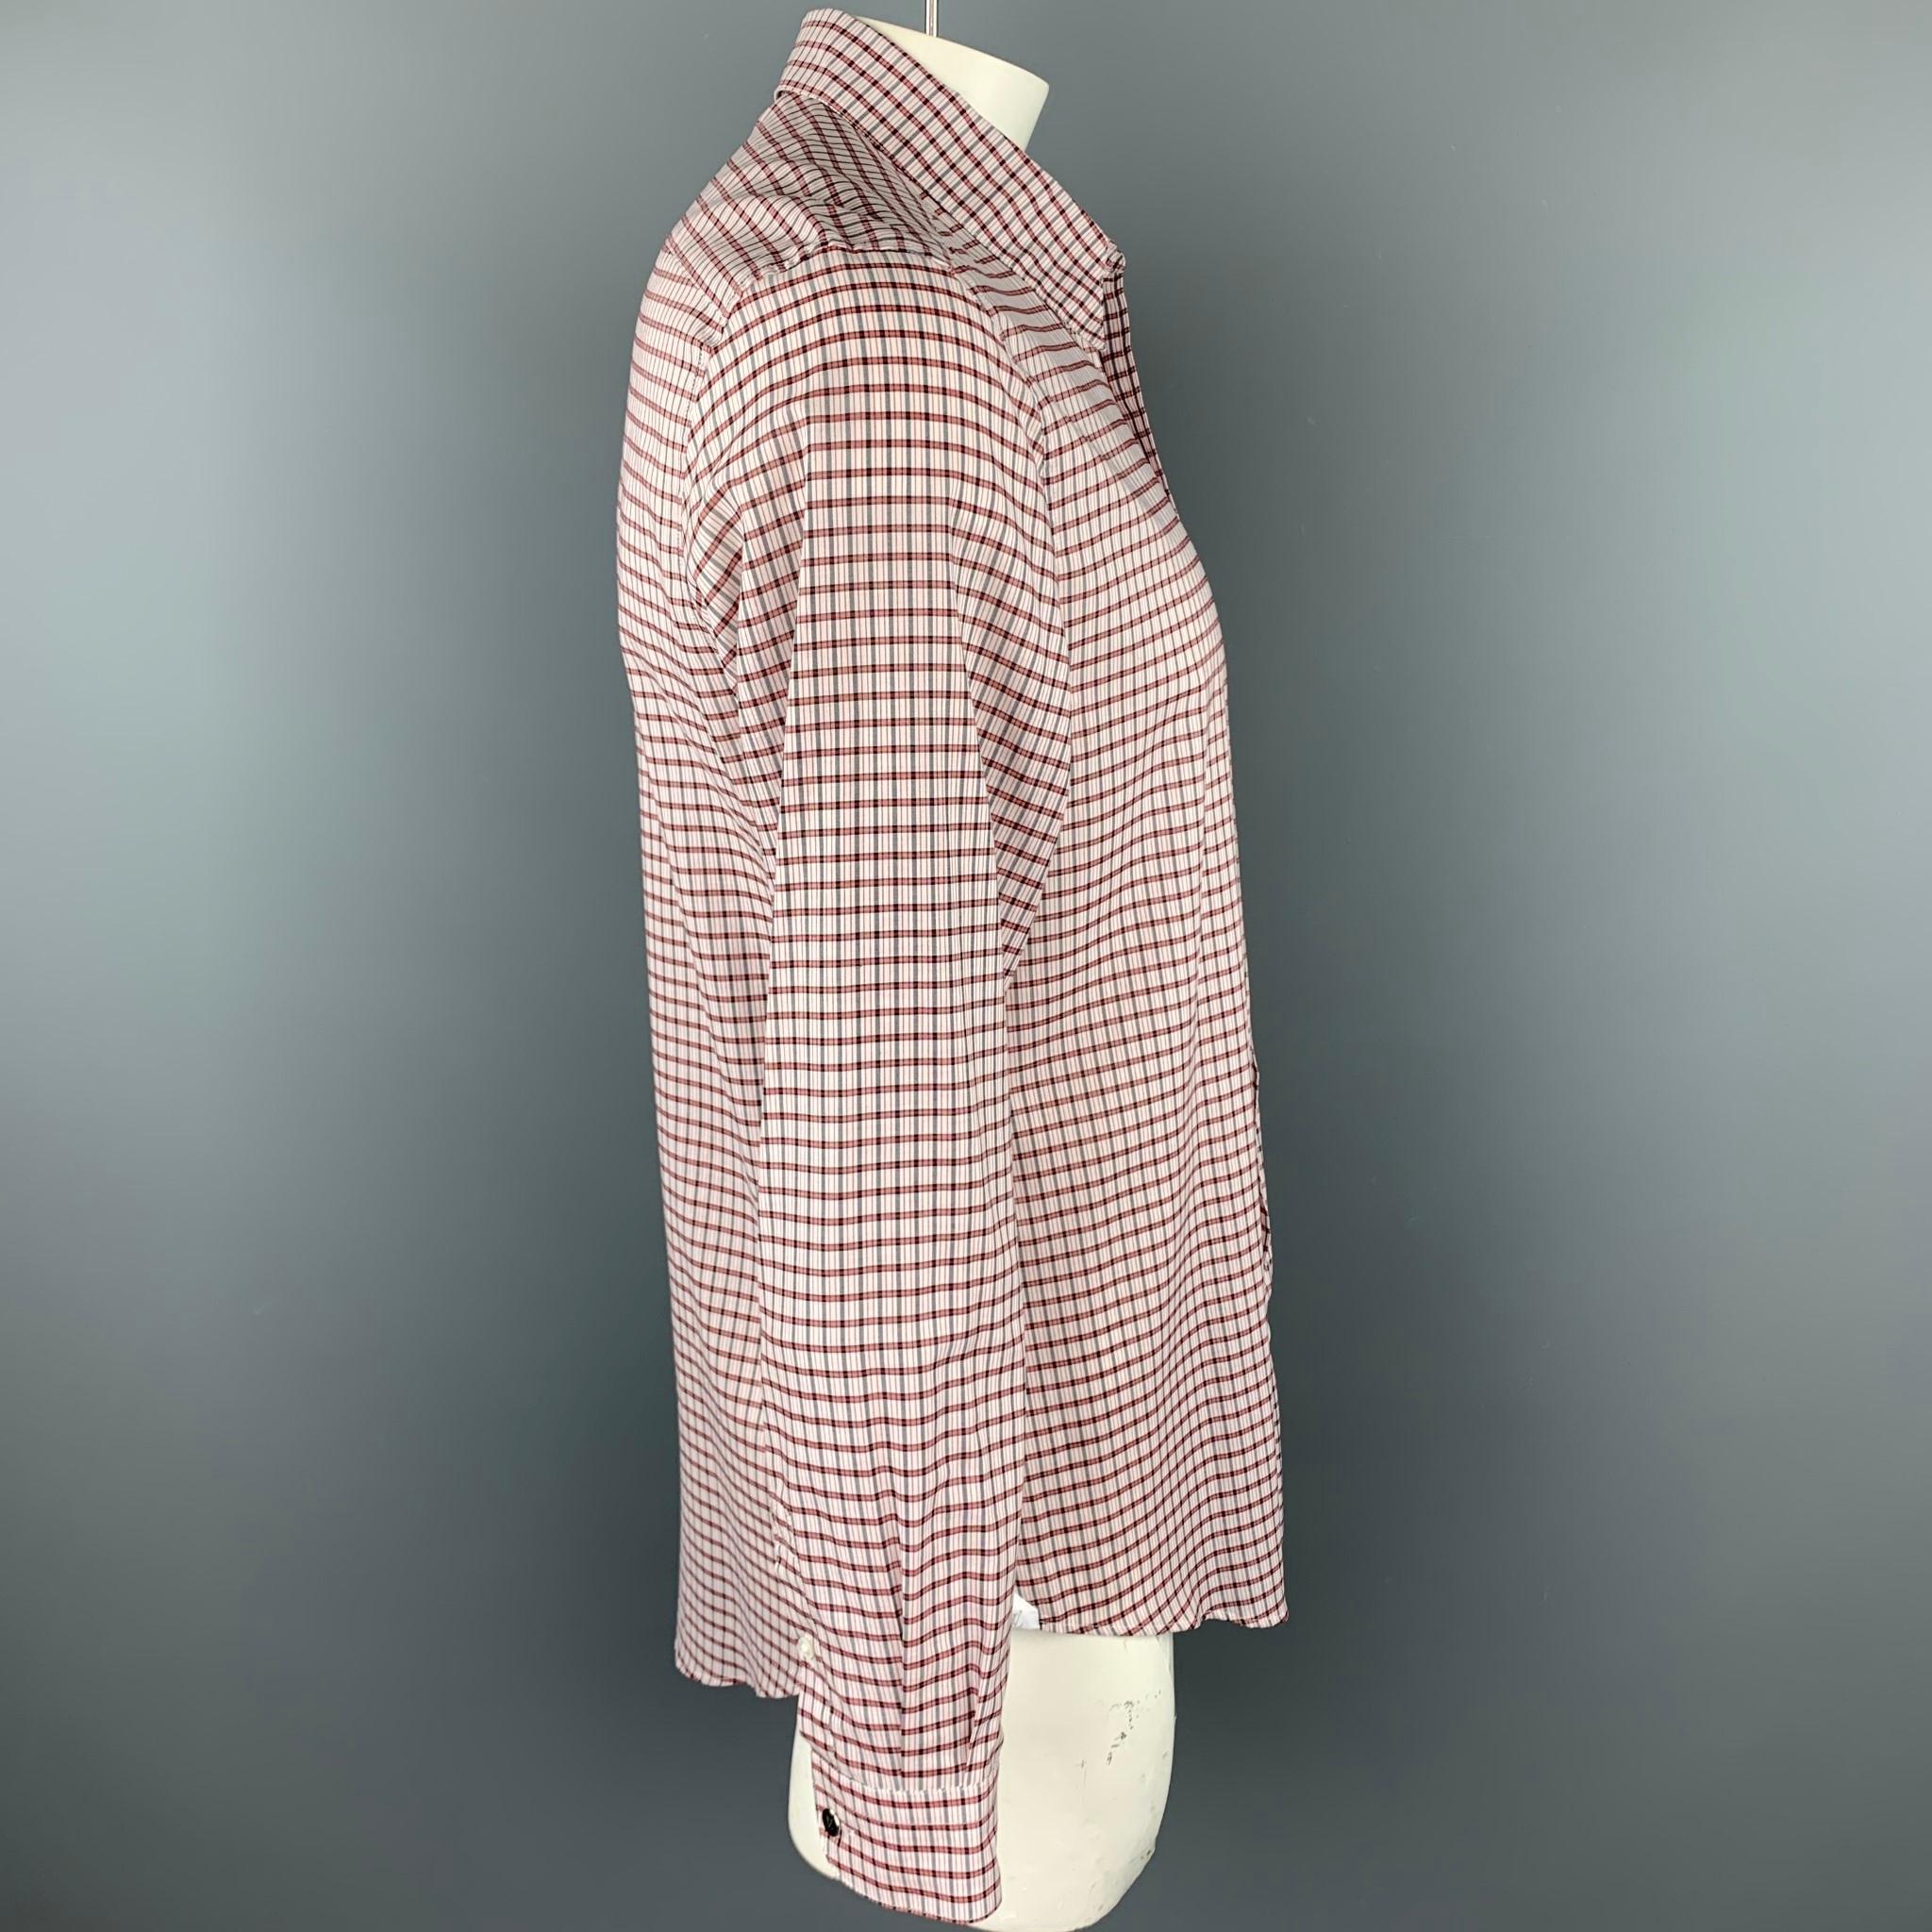 LOUIS VUITTON long sleeve shirt comes in a rose & brick plaid cotton featuring a button up style and a spread collar. Made in France.

Excellent Pre-Owned Condition.
Marked: XL

Measurements:

Shoulder: 18.5 in. 
Chest: 44 in.
Sleeve: 26 in.